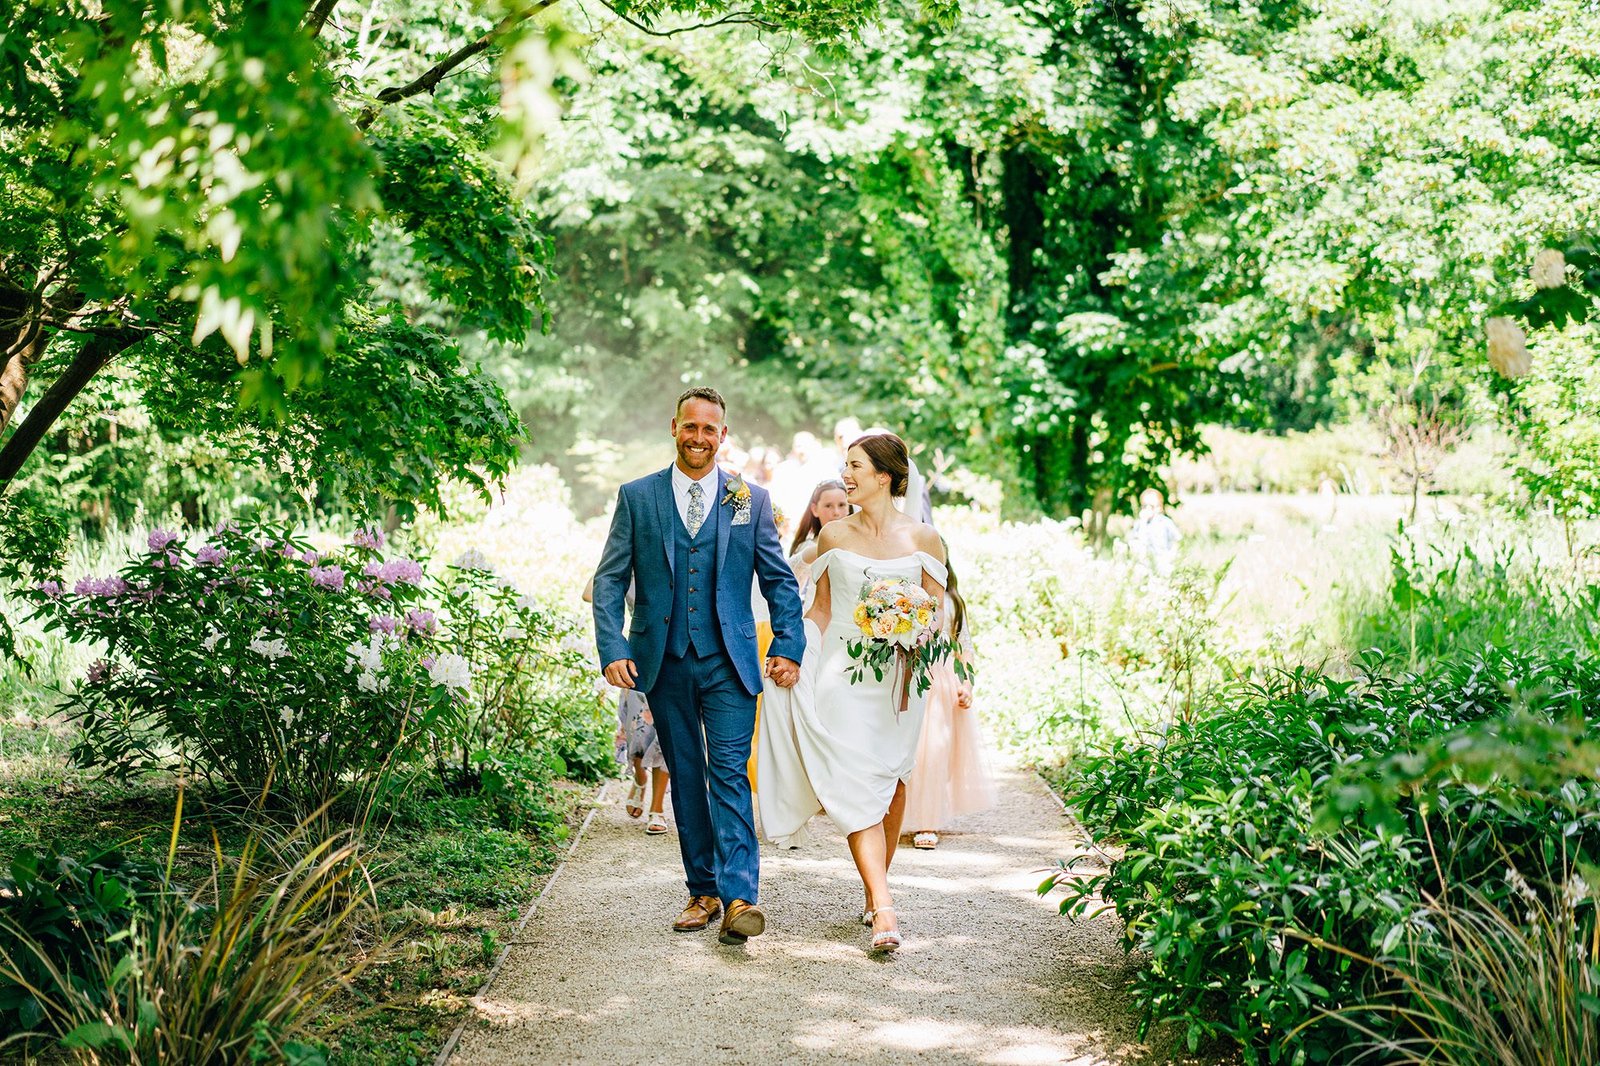 Younger photography wedding at Deer Park Manor House